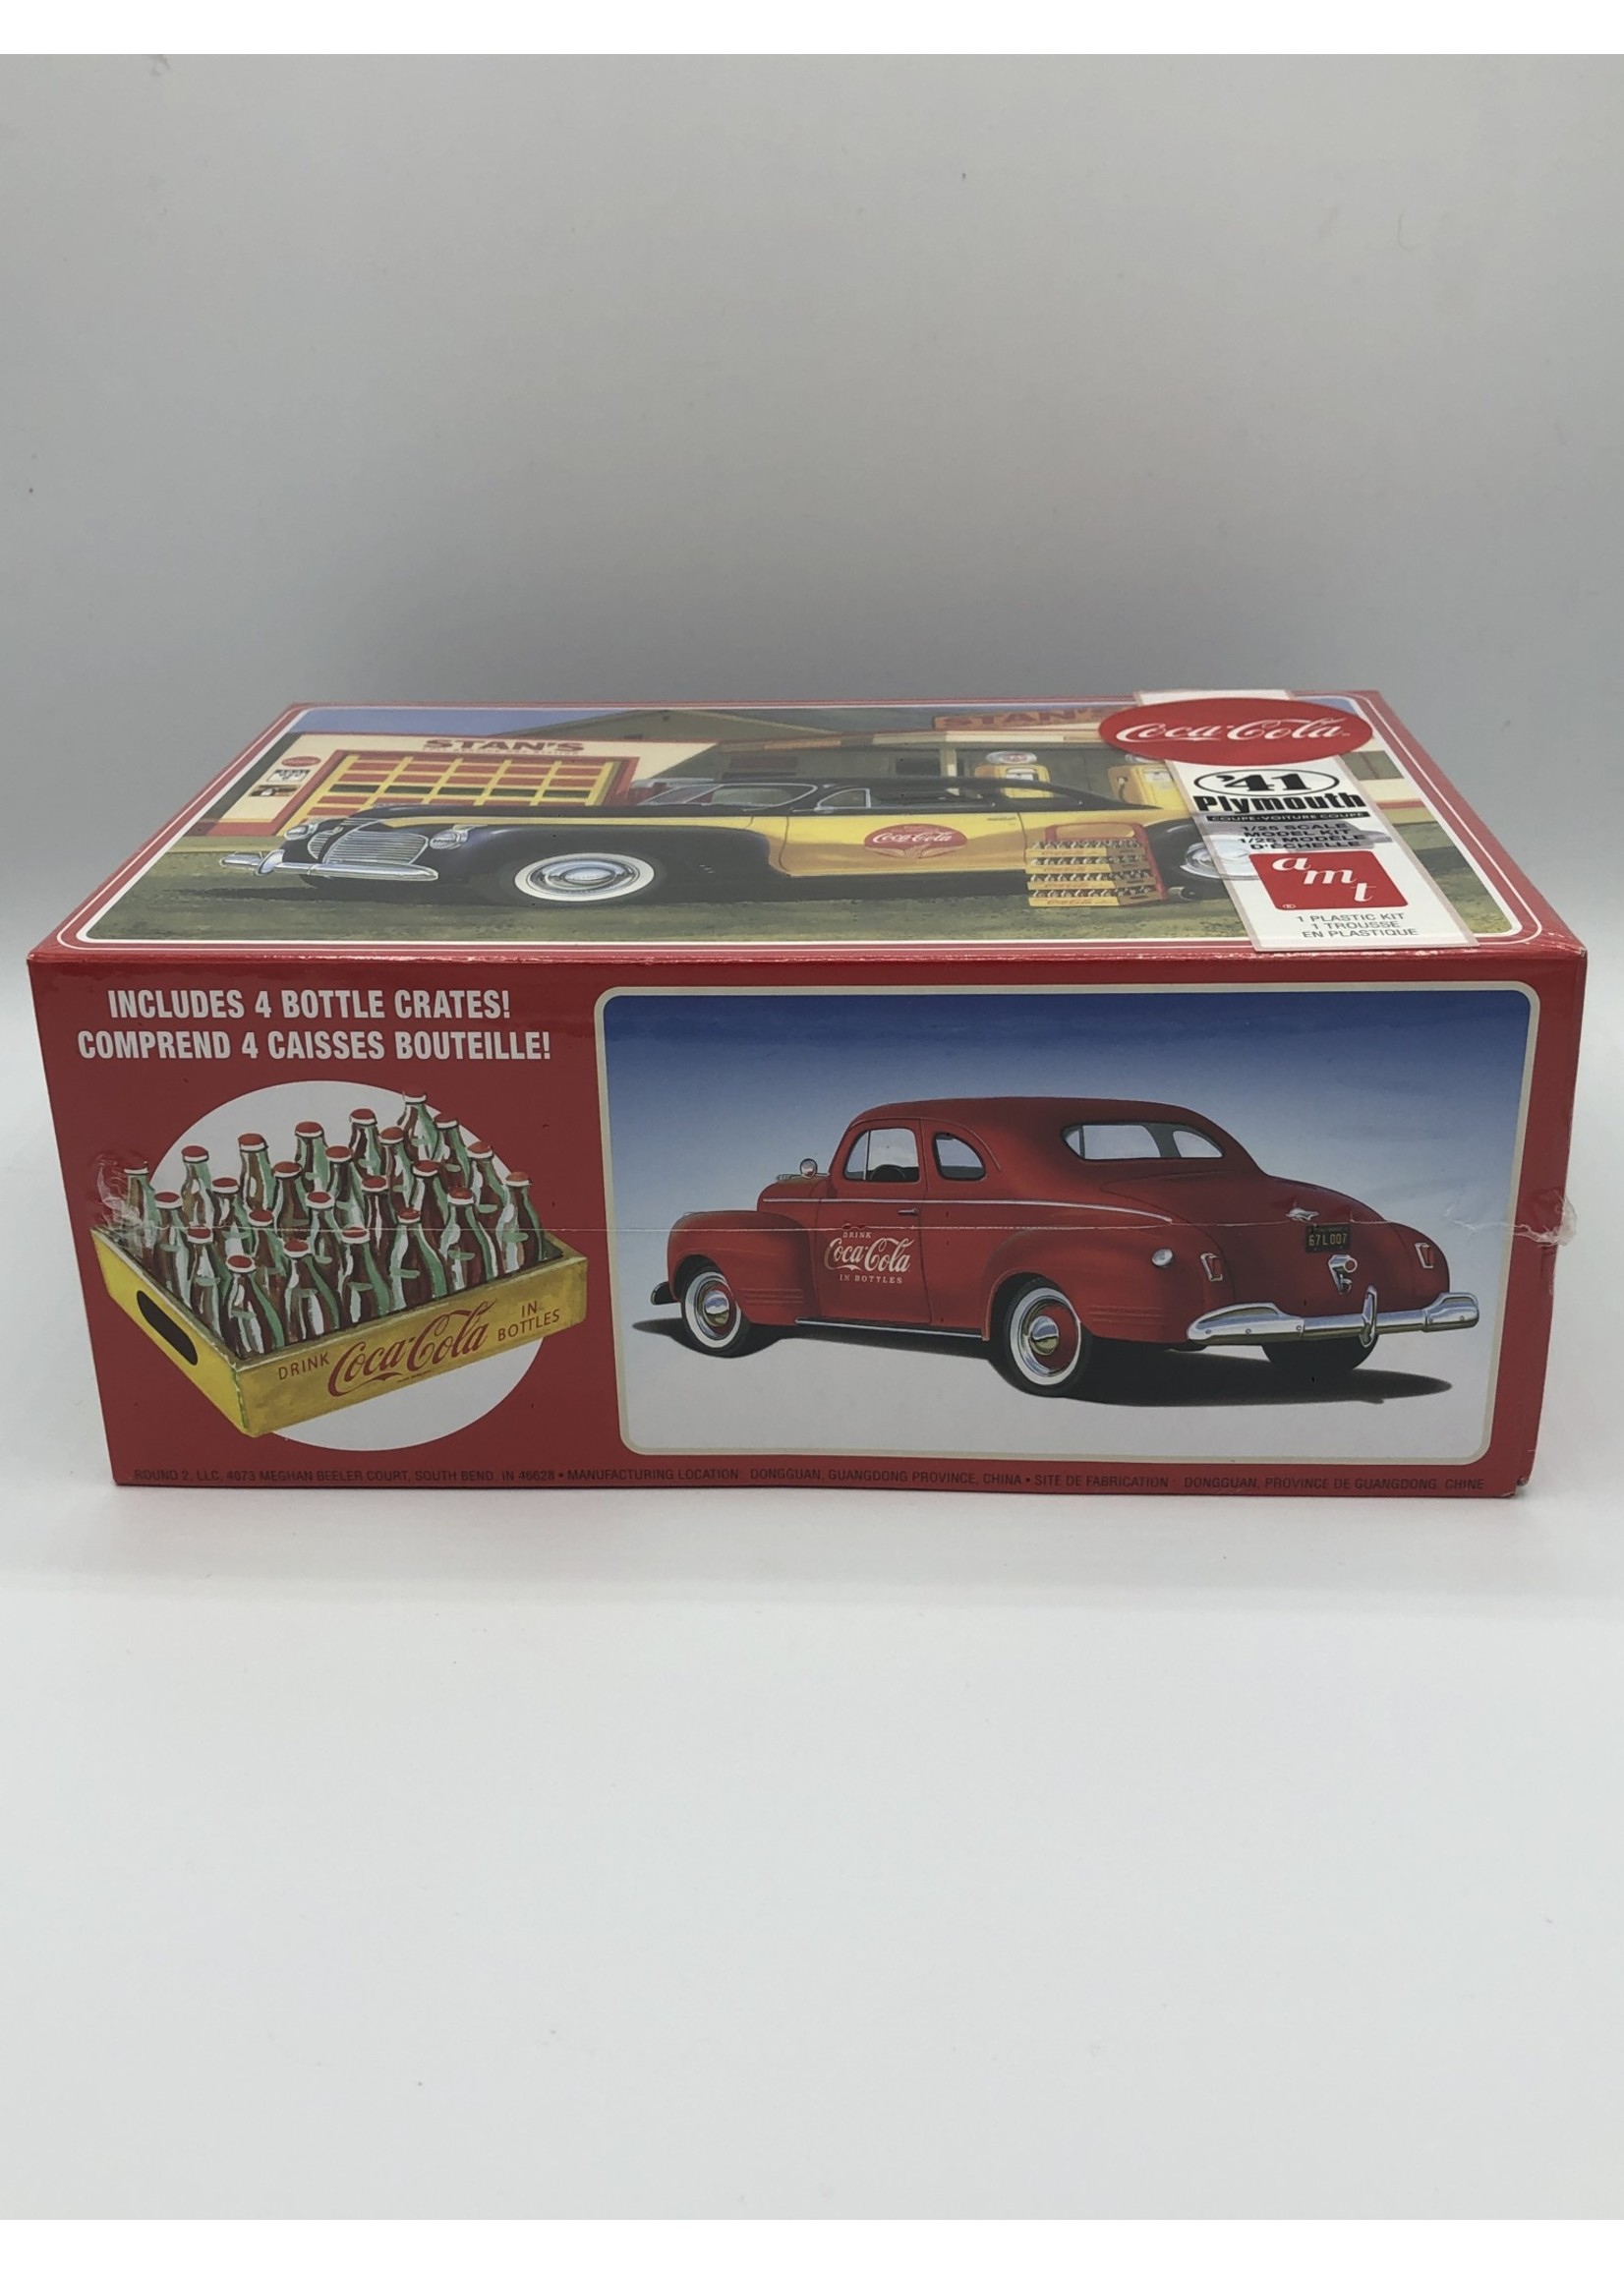 Models AMT 41 Plymouth Coupe Coca Cola Model